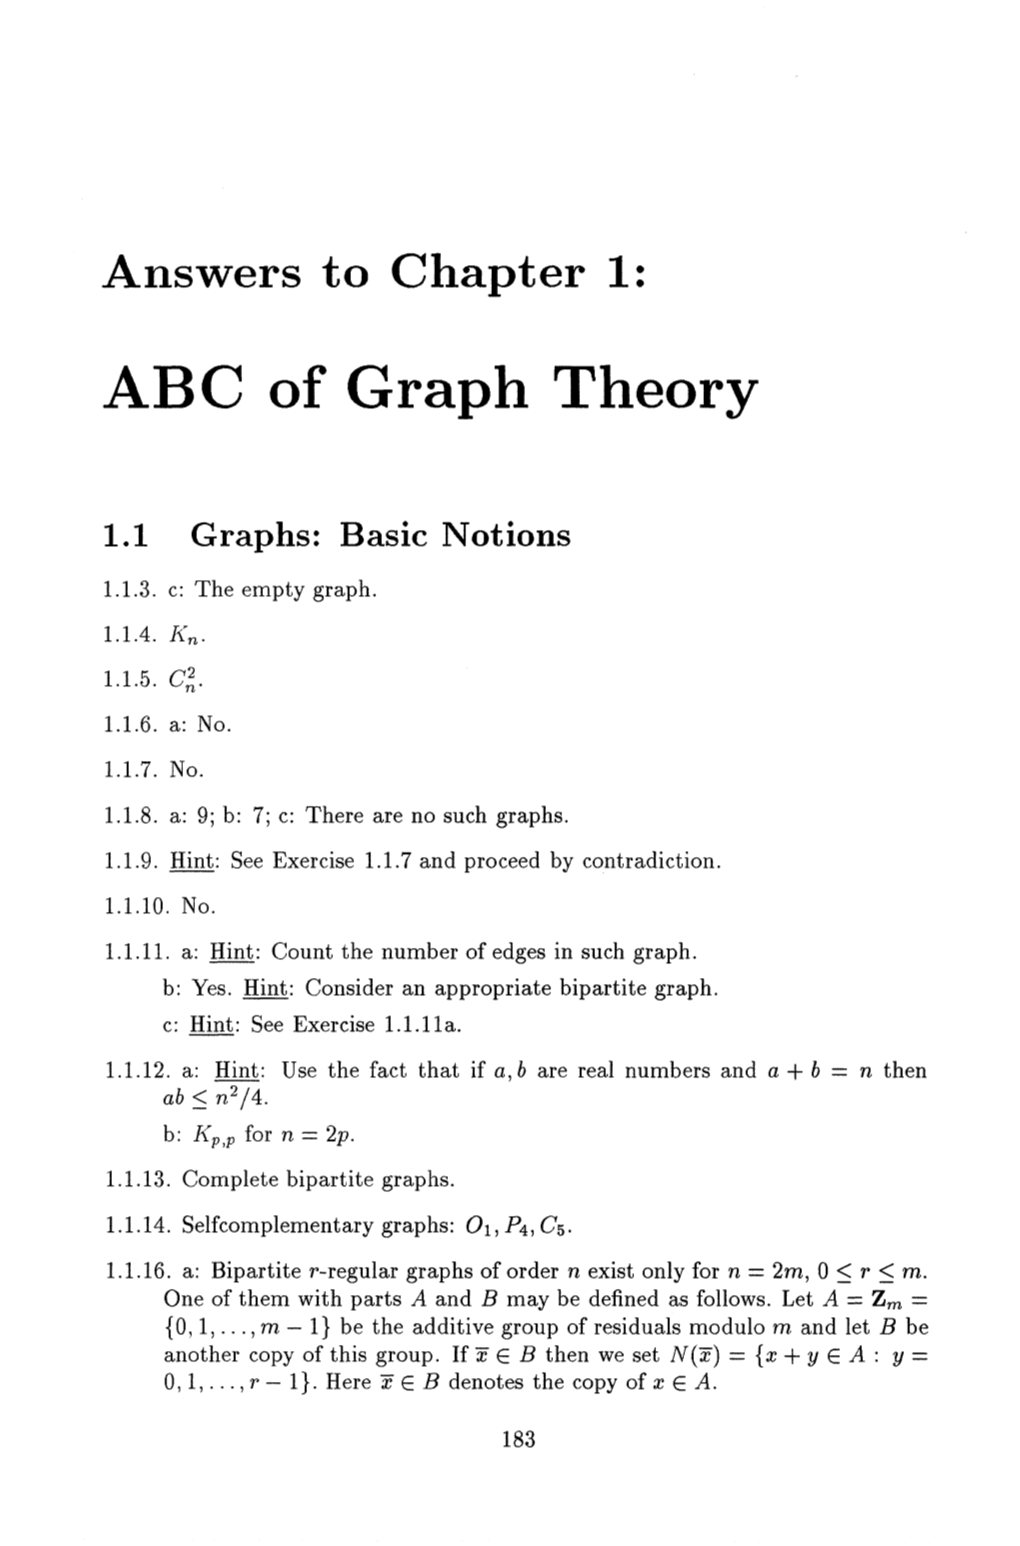 ABC of Graph Theory